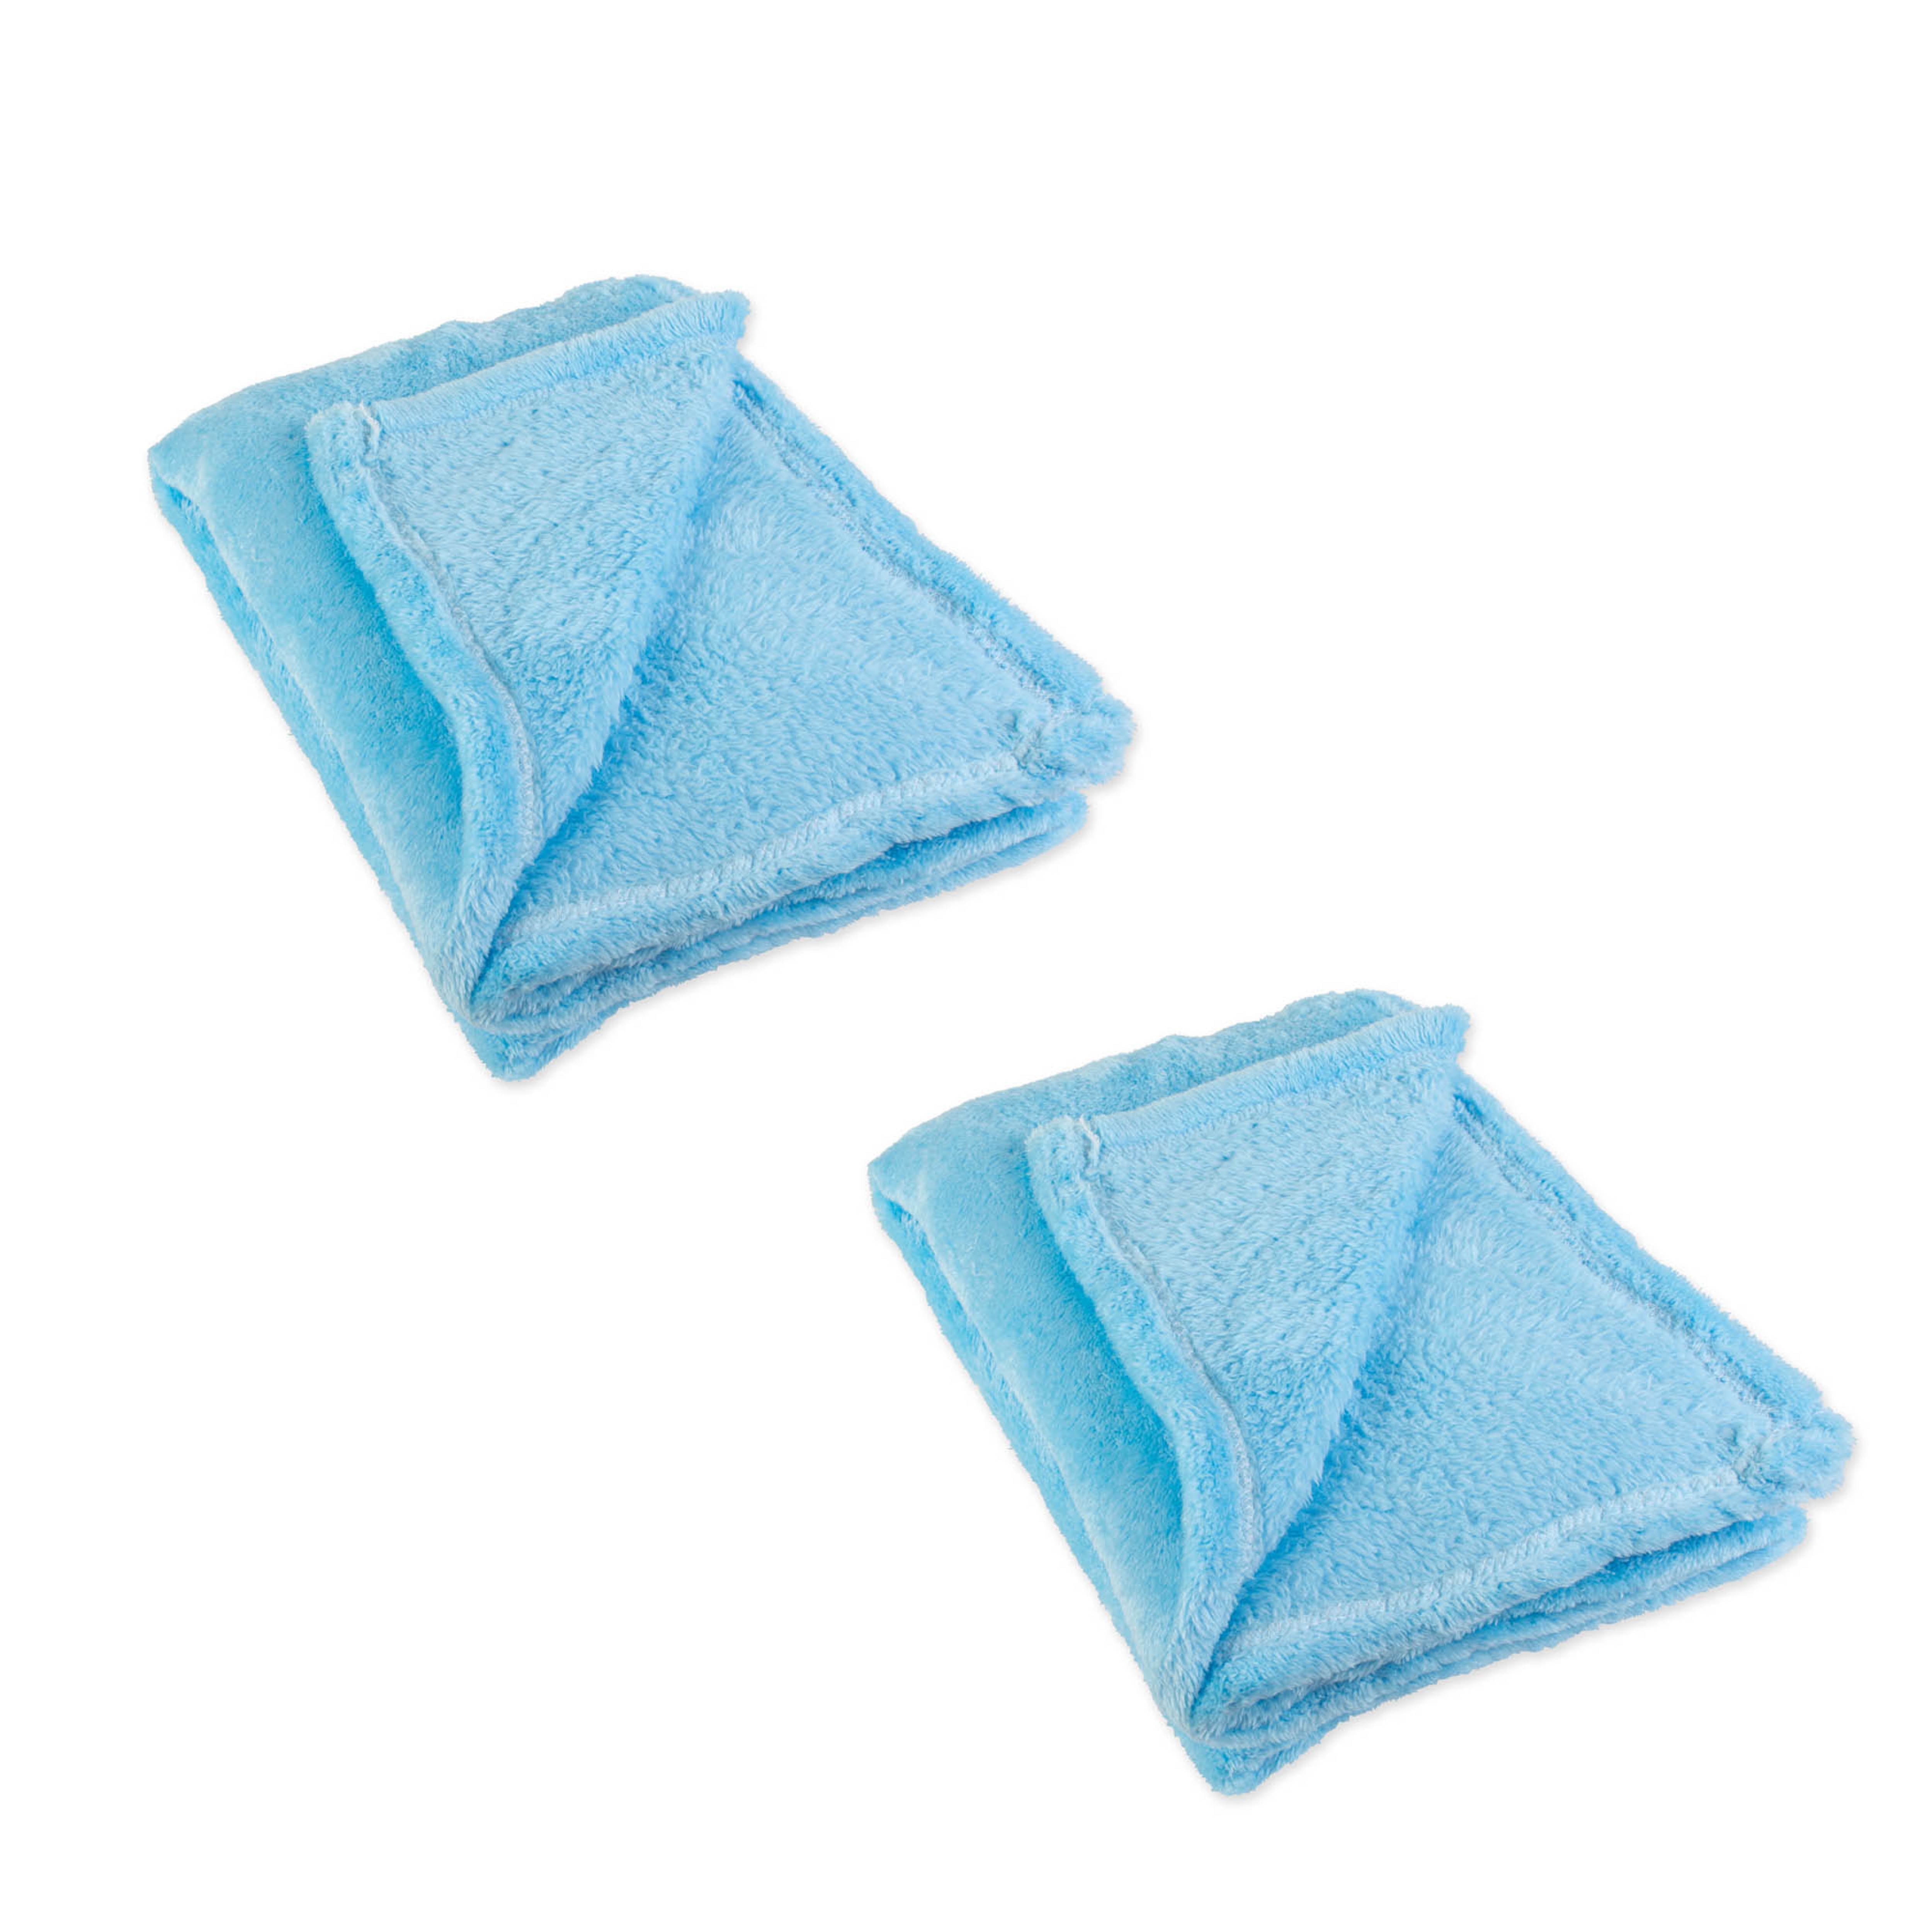 70105a Bright Fuzzy Fleece Throw, Sea Breeze, 50 X 60 In. - Pack Of 2